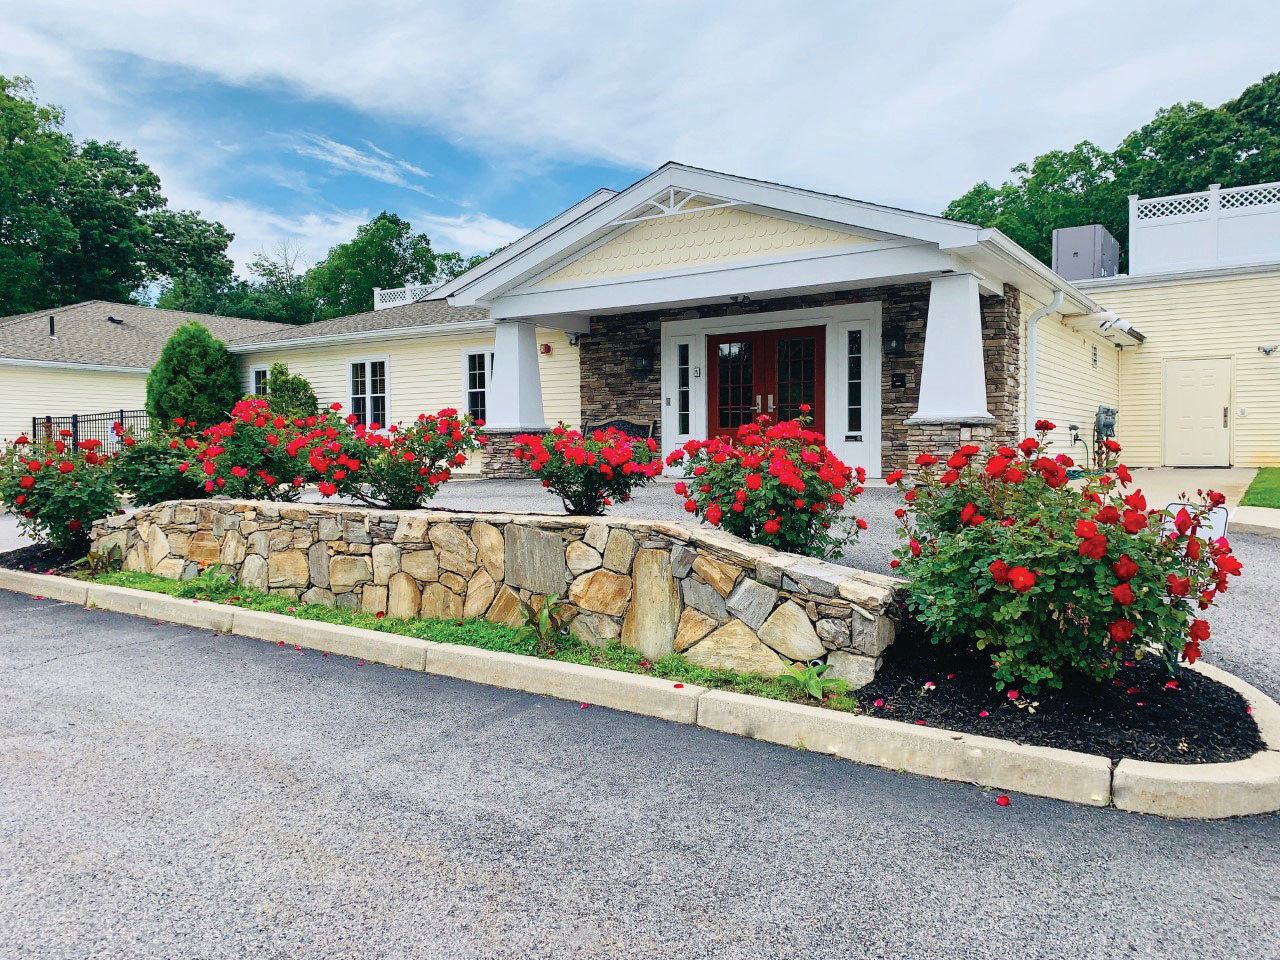 Briarcliffe Gardens Memory Care Assisted Living Residence on Old Pocasset Road in Johnston provides compassionate care and research-backed services to those with Alzheimer’s Disease, dementia and other memory-loss conditions.